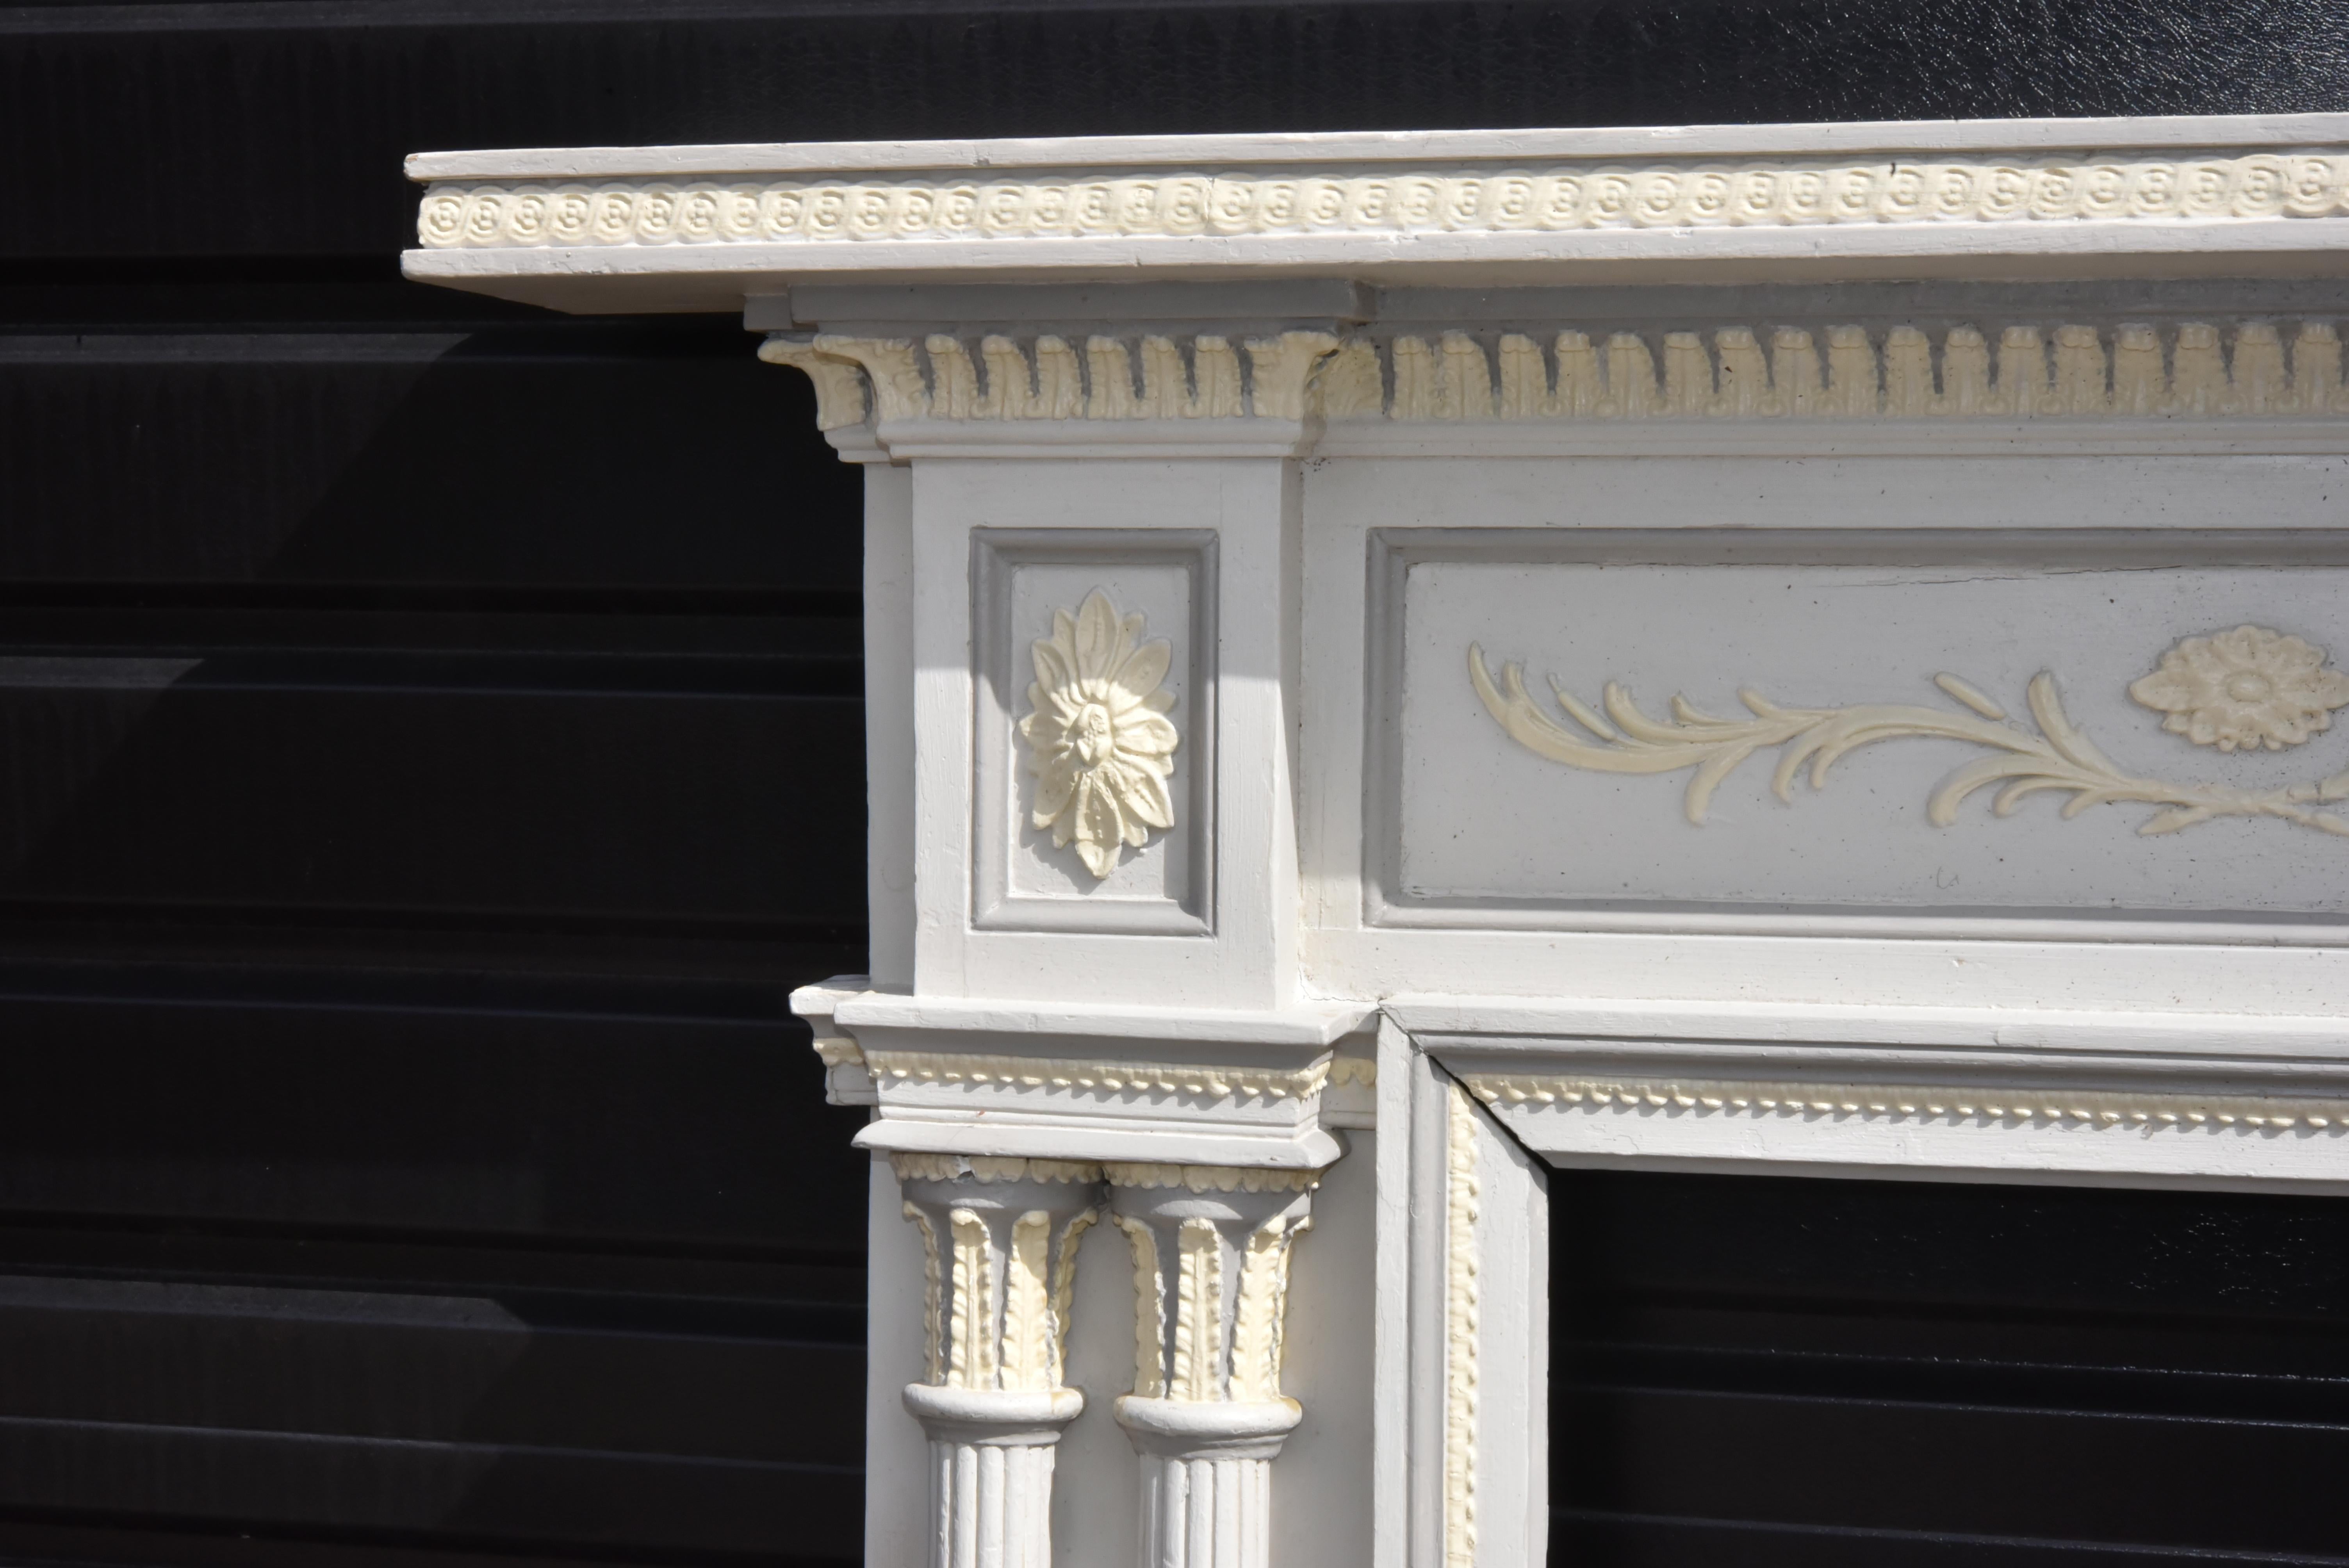 Wonderful 18th century fire surround in the Adams style ,
Provenance This fire surround was removed from Ashton court Bristol .
It is in great condition has been later painted ,
The fire surround comes in three sections for transport with easy